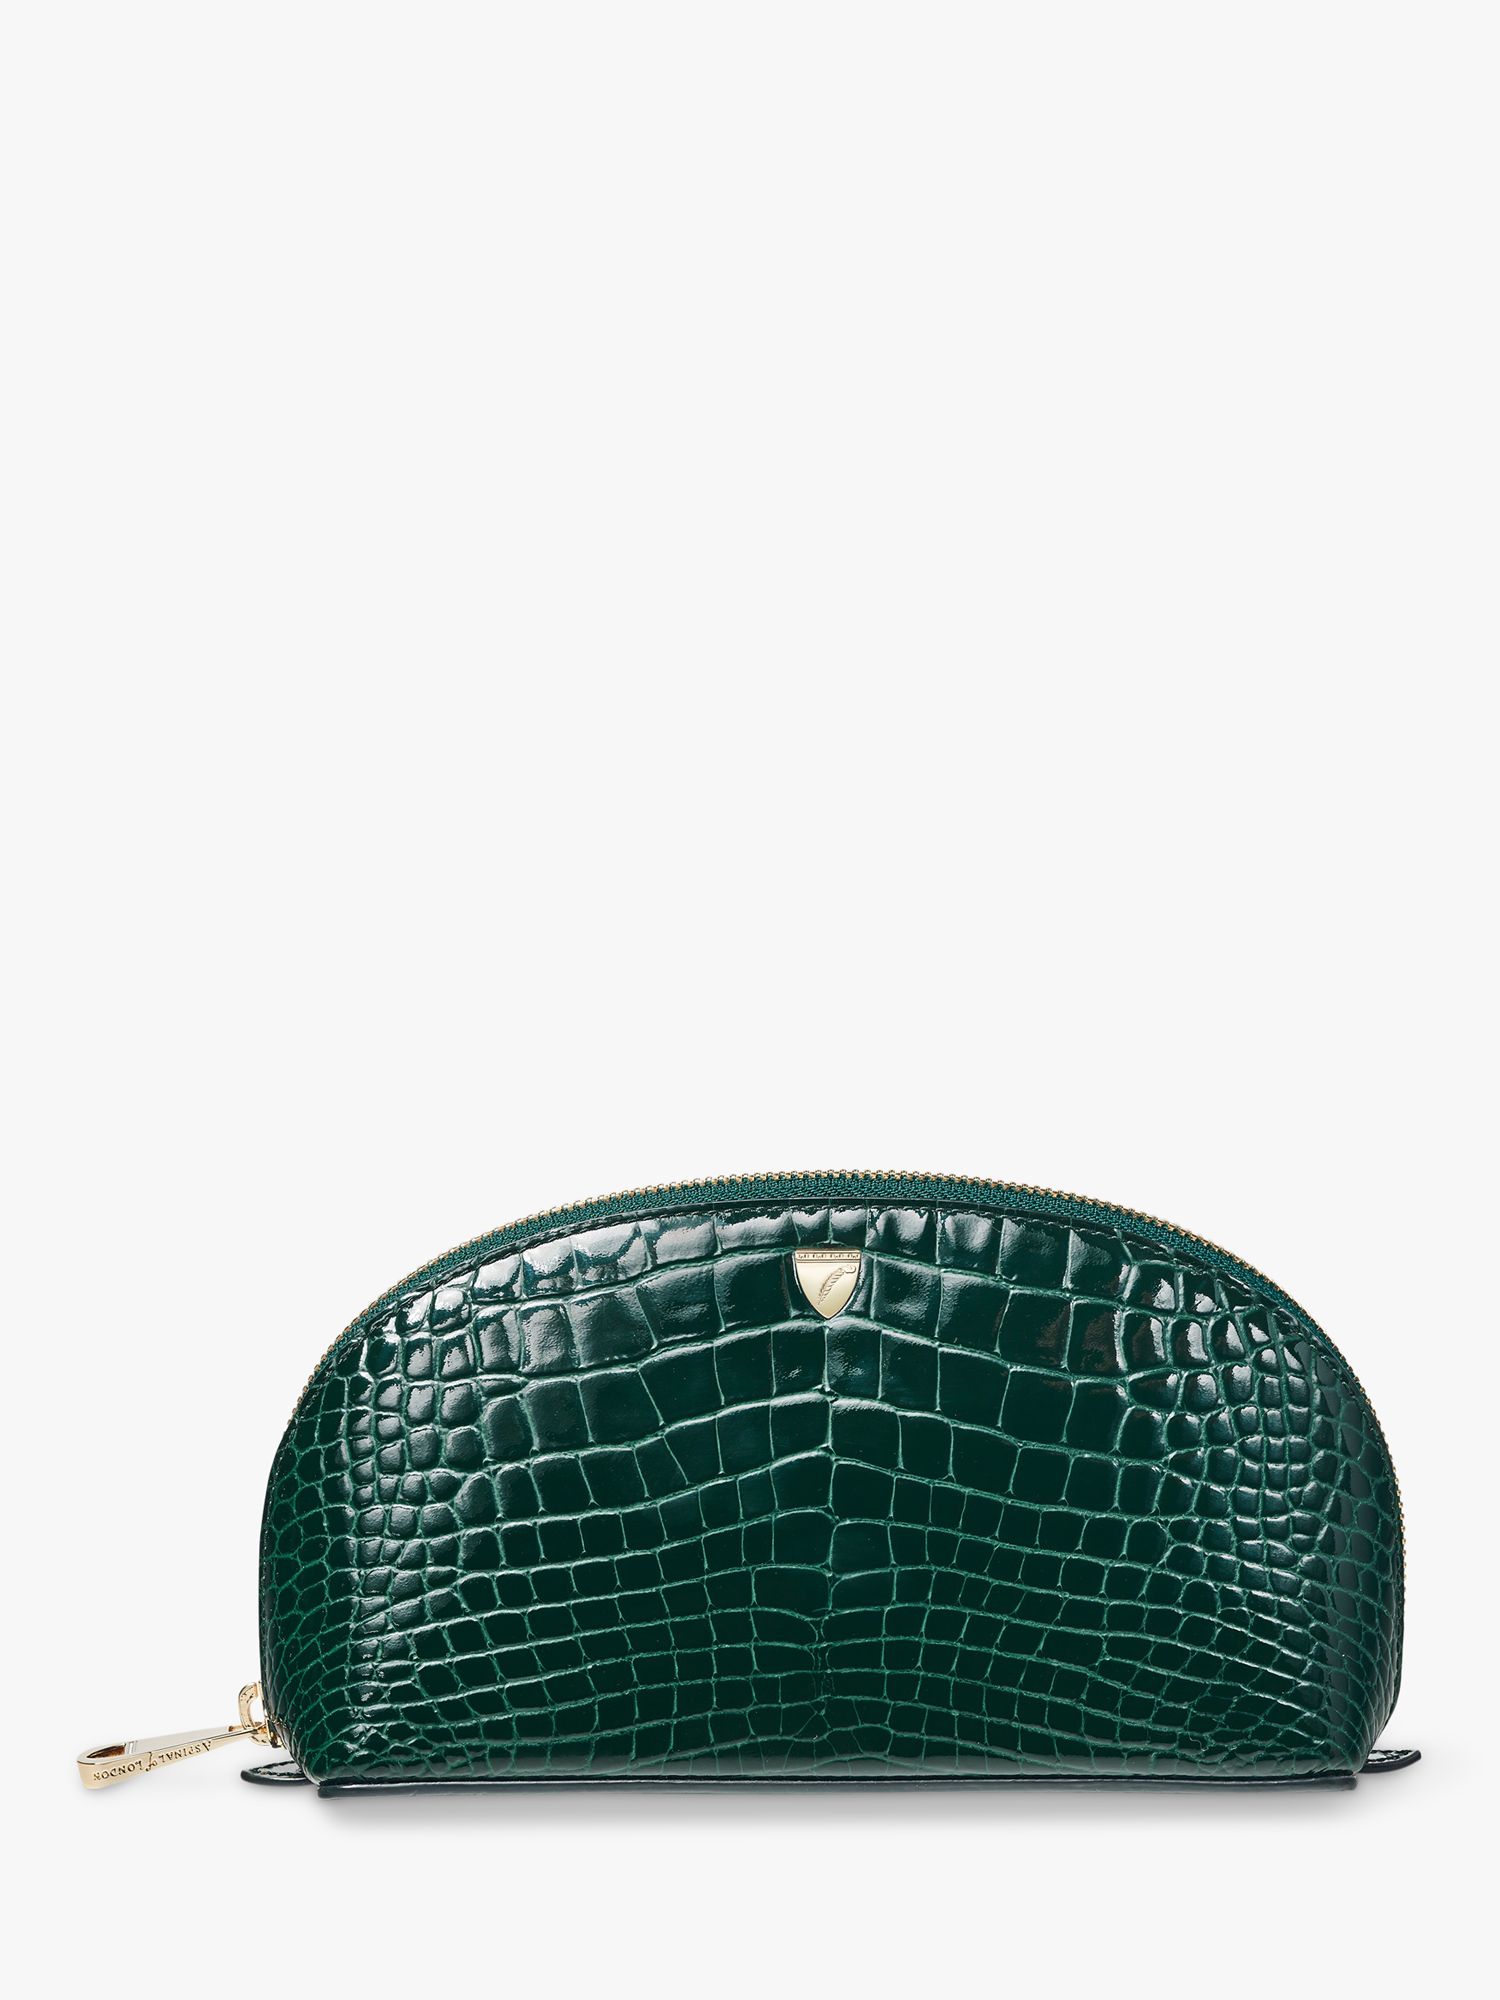 Aspinal of London Small Croc Effect Leather Cosmetic Case, Evergreen 1